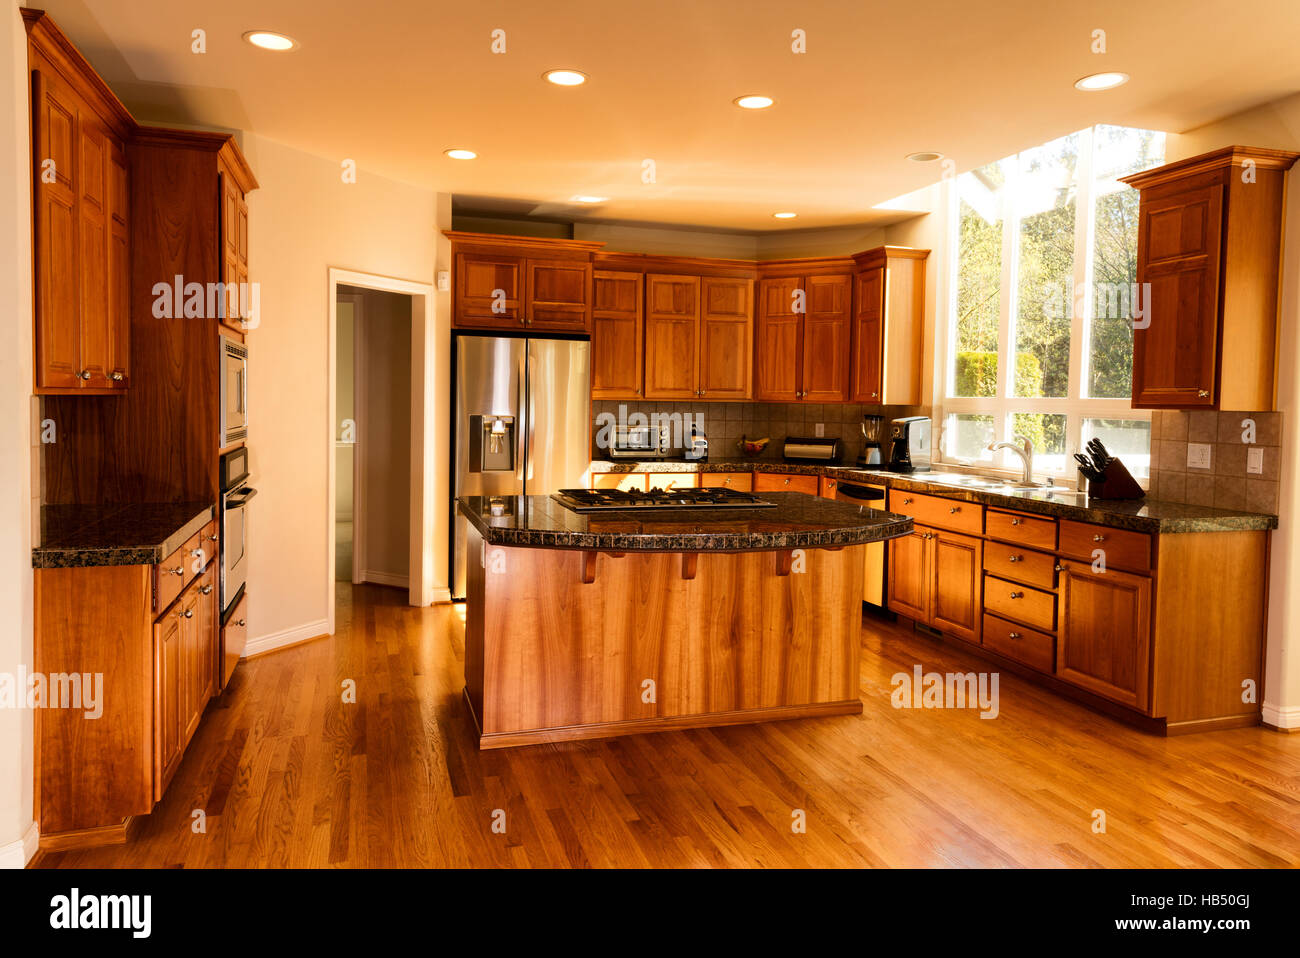 Clean home kitchen Stock Photo